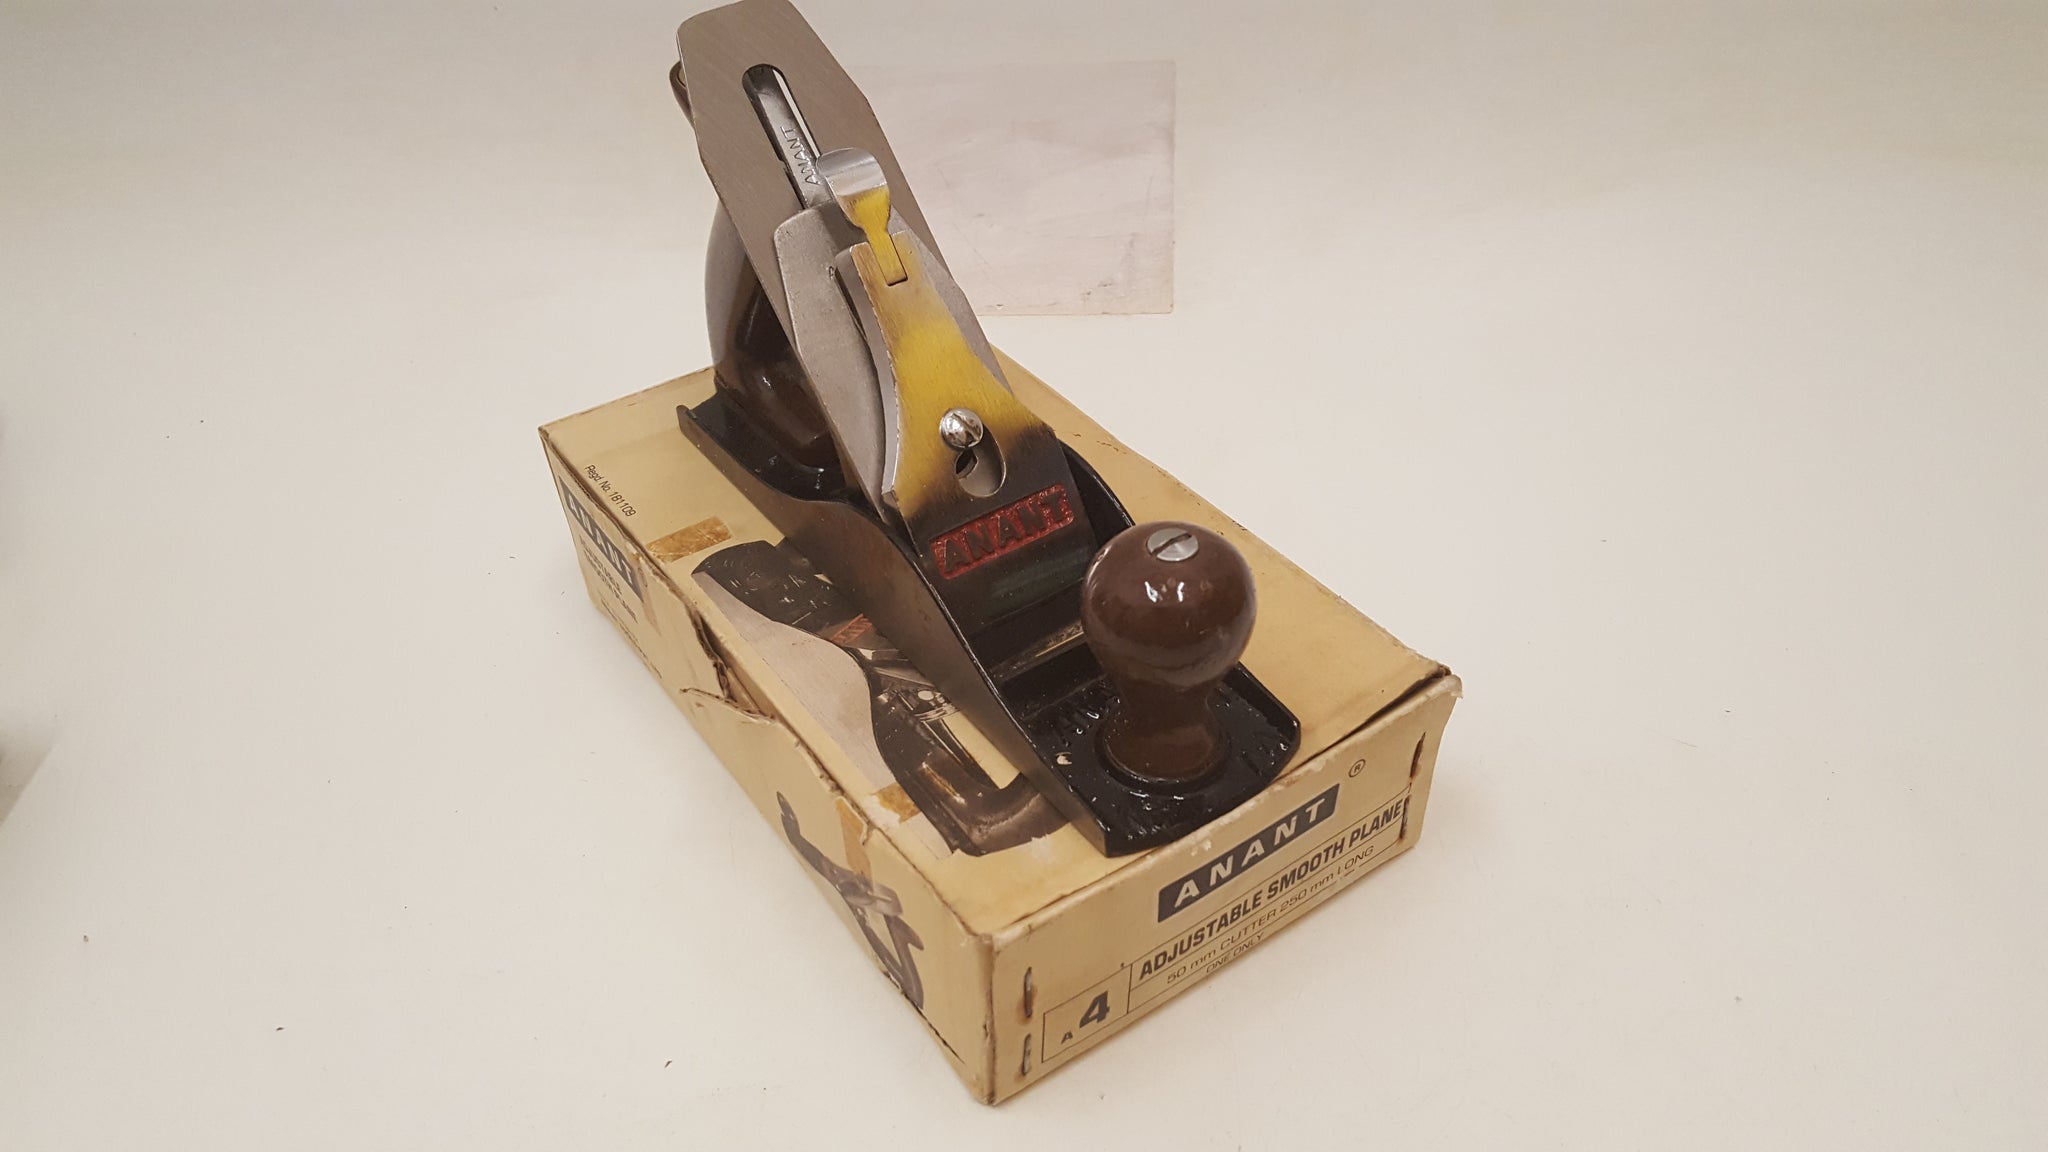 Vintage Anant A4 Adjustable Smoothing Plane in Box Very Good Condition 38746